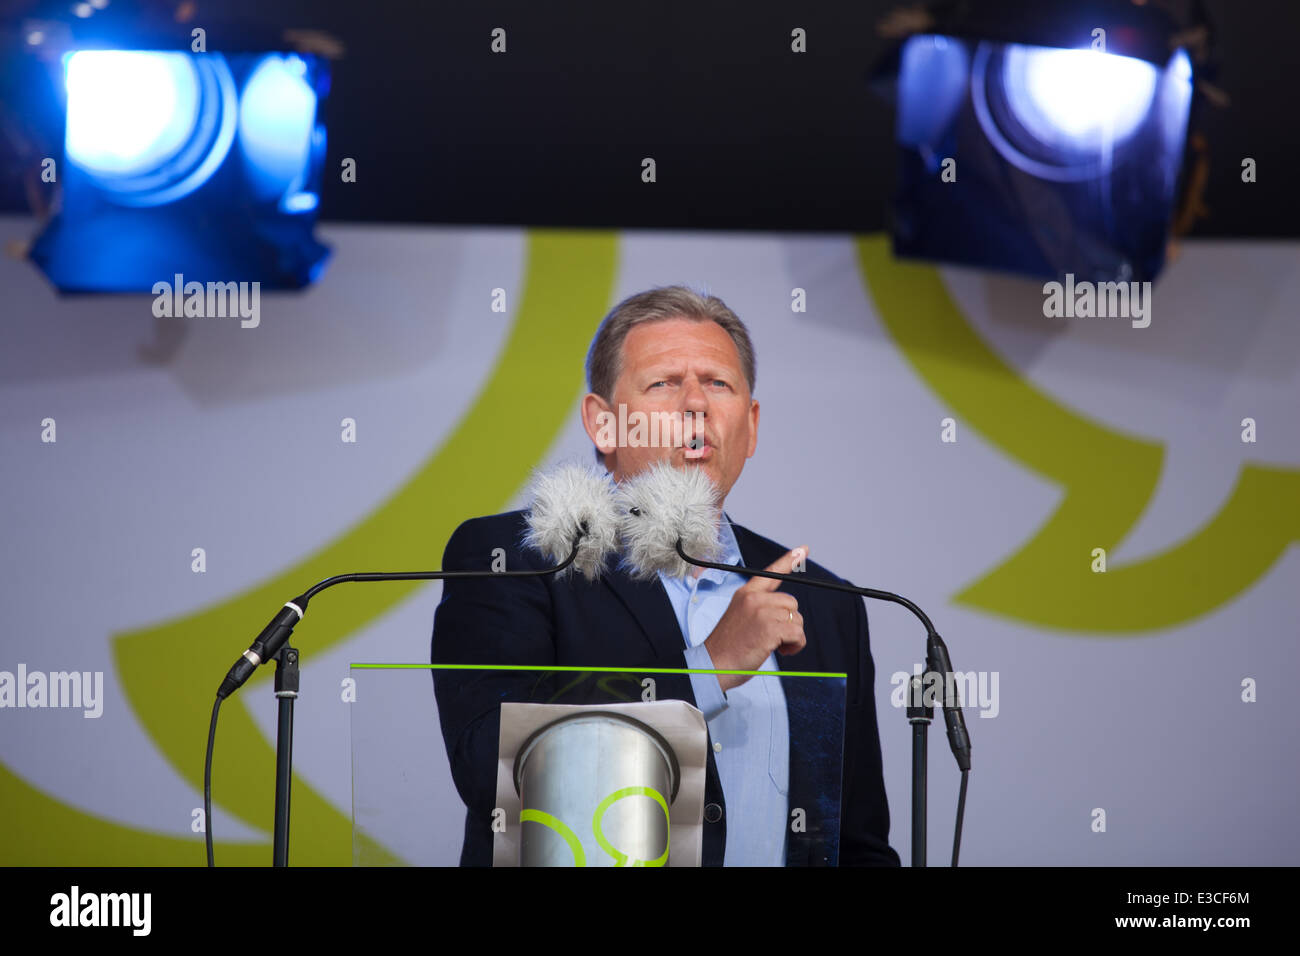 Det Konservative Folkeparti High Resolution Stock Photography and Images -  Alamy